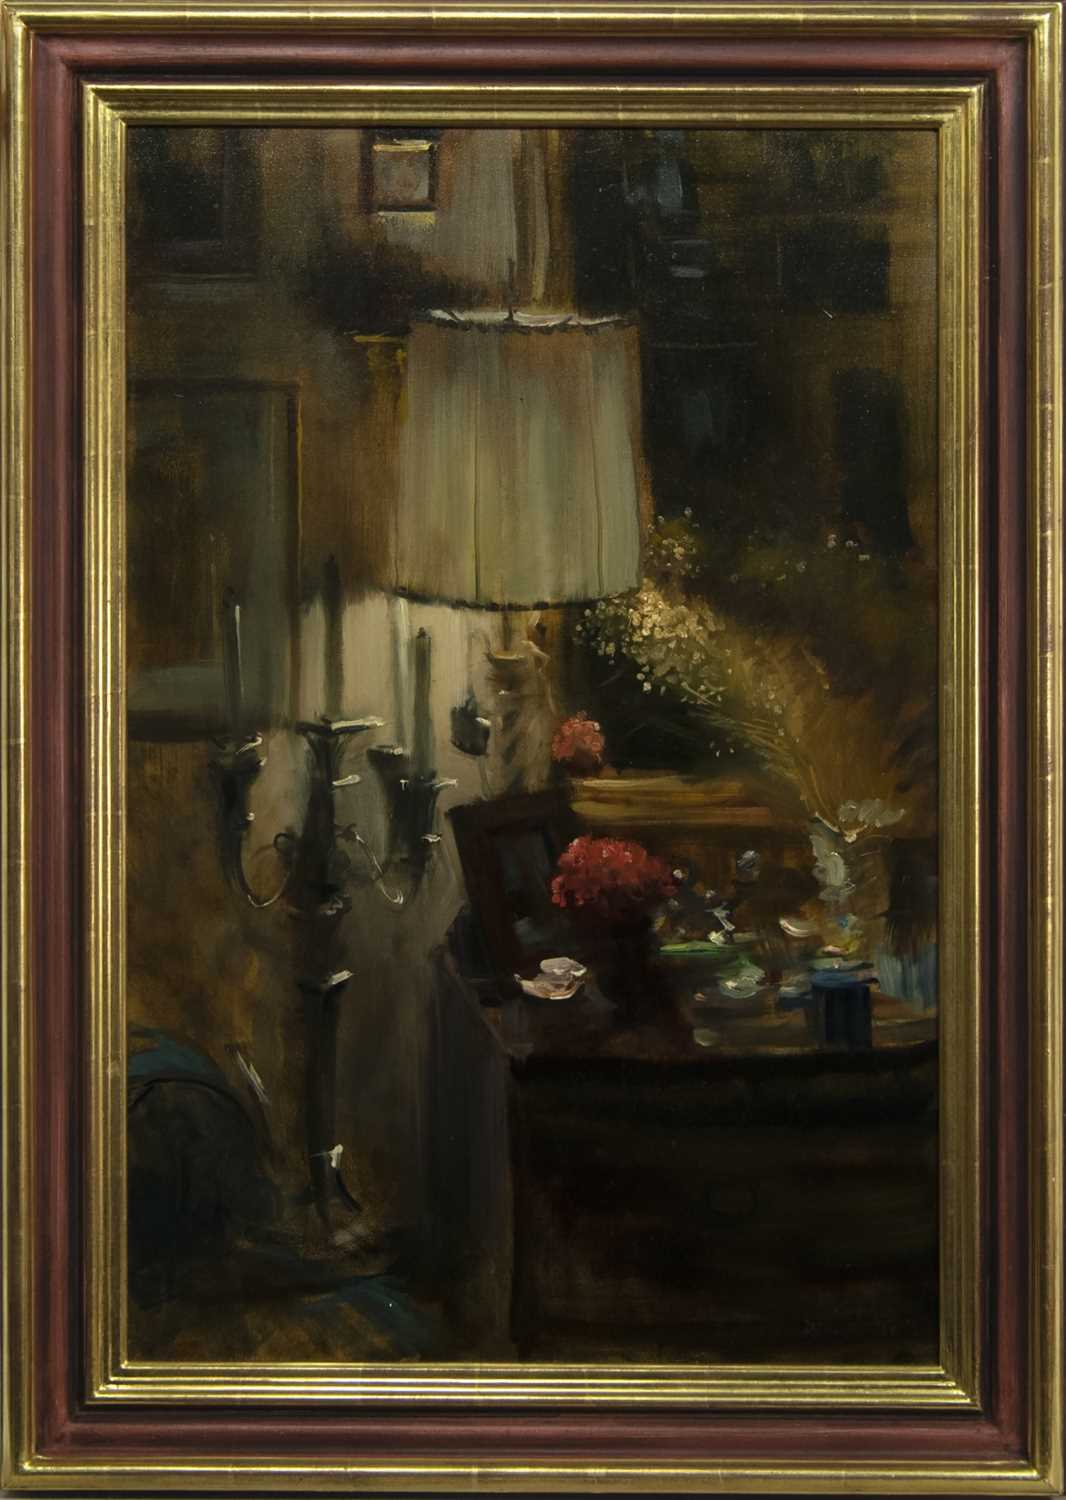 Lot 519 - NO. 1 JEANNE'S DRESSING TABLE IV, AN OIL BY GEORGE J D BRUCE